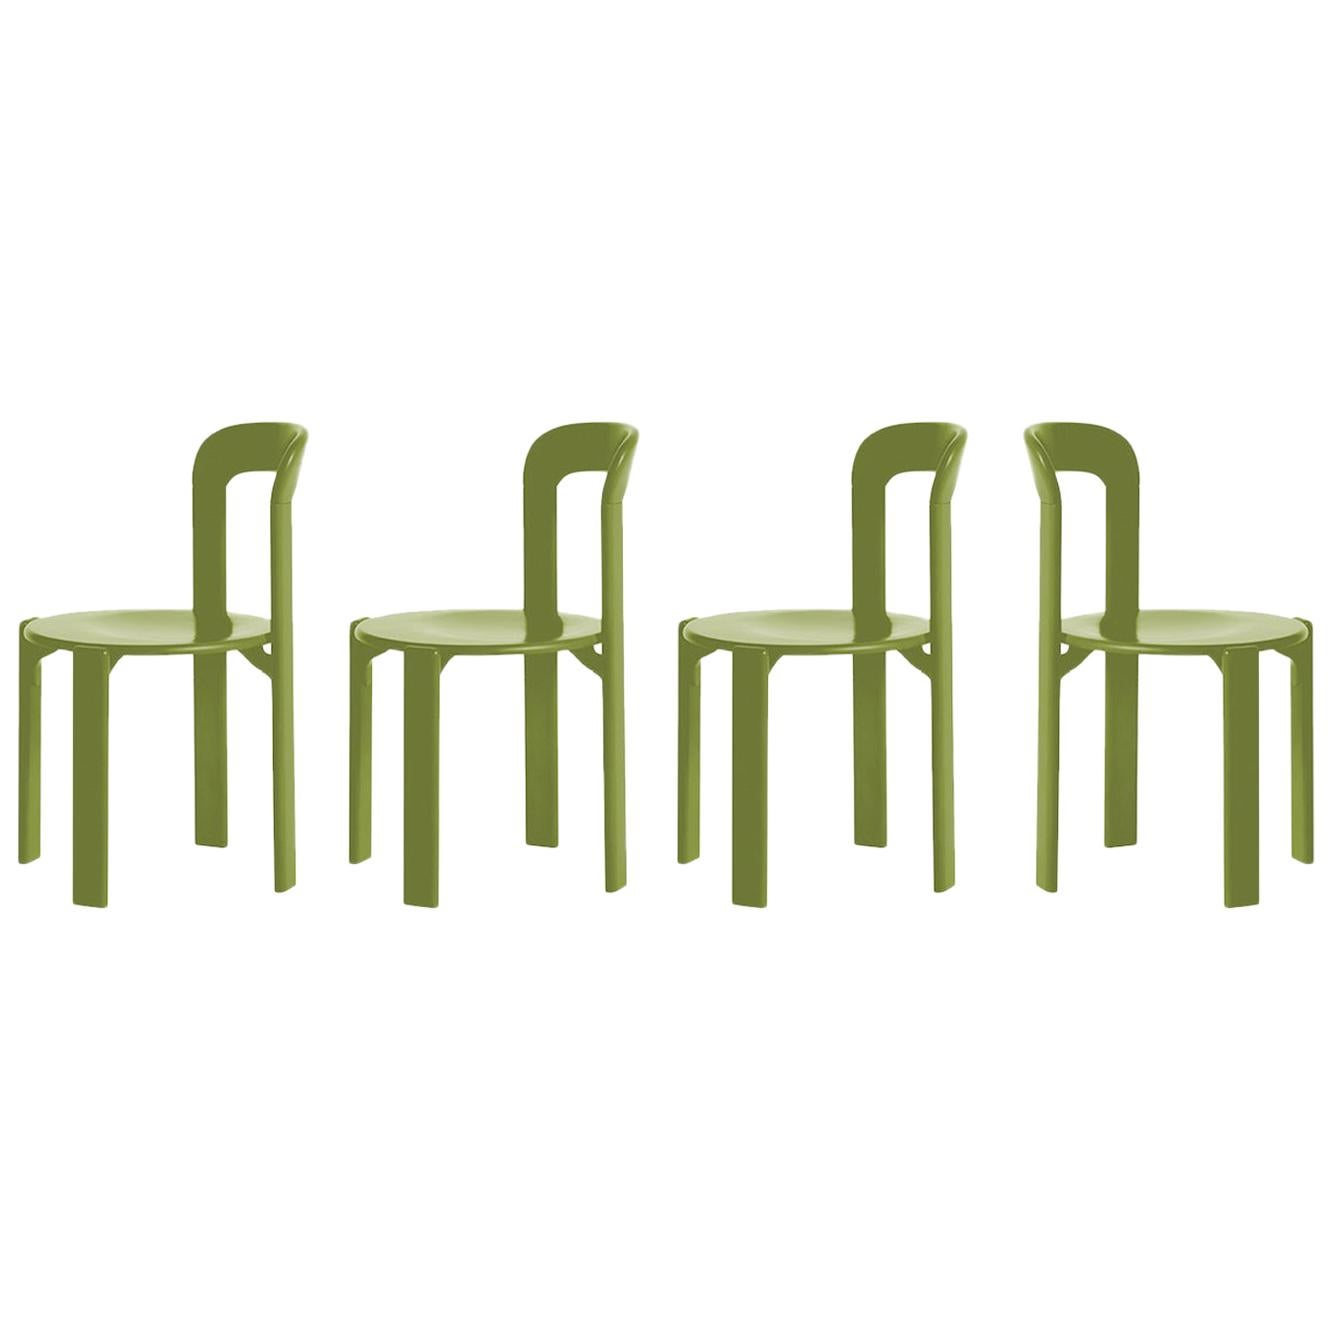 Set of 4 Arik Levy SA1 Green Rey Chairs by Dietiker, a Swiss Icon Since 1971